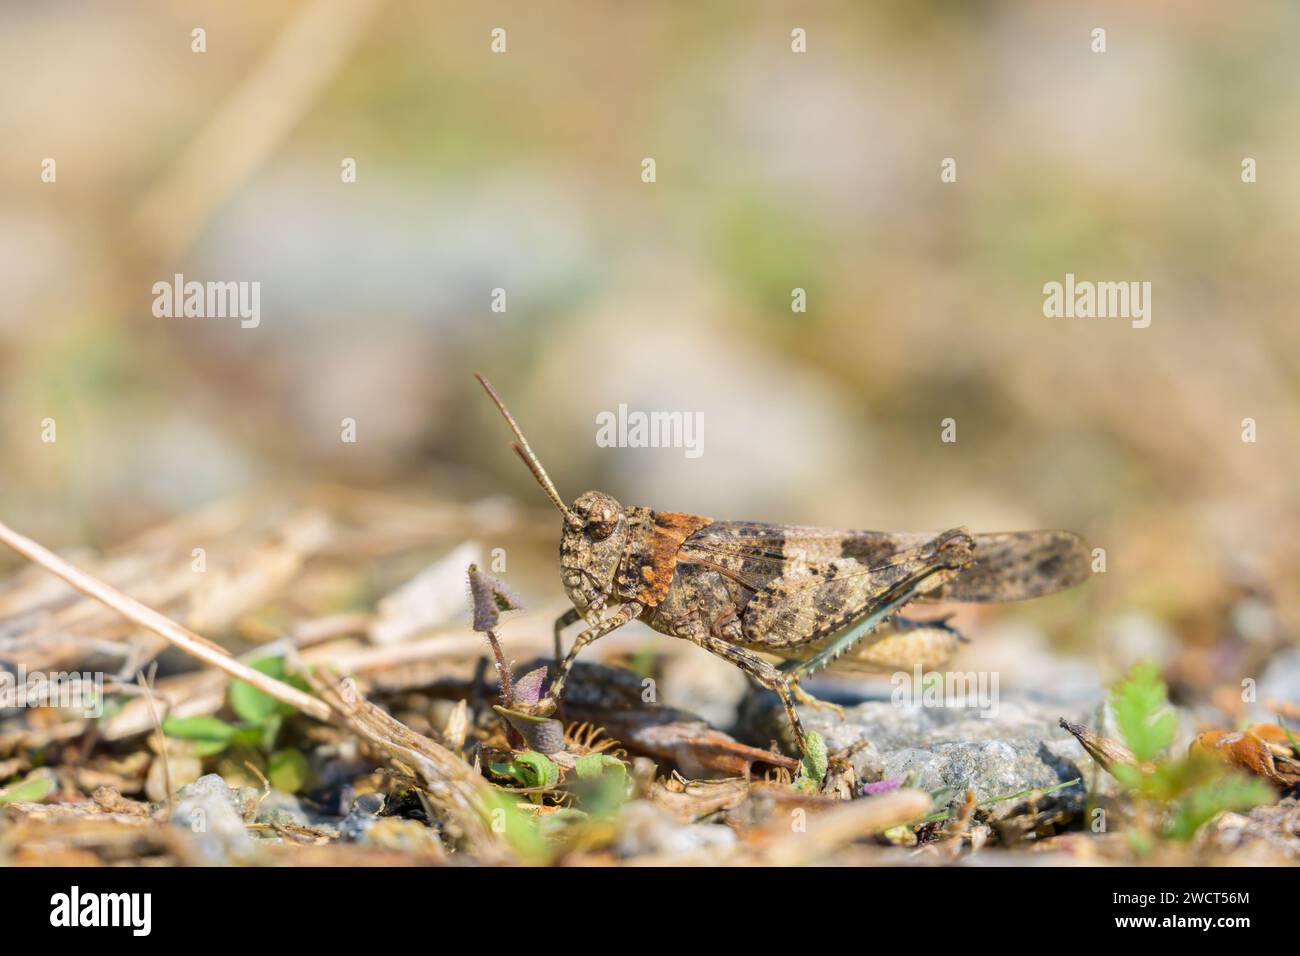 A Blue Winged Grasshopper (Oedipoda caerulescens) sitting on the ground, sunny day in summer, Vienna (Austria) Stock Photo